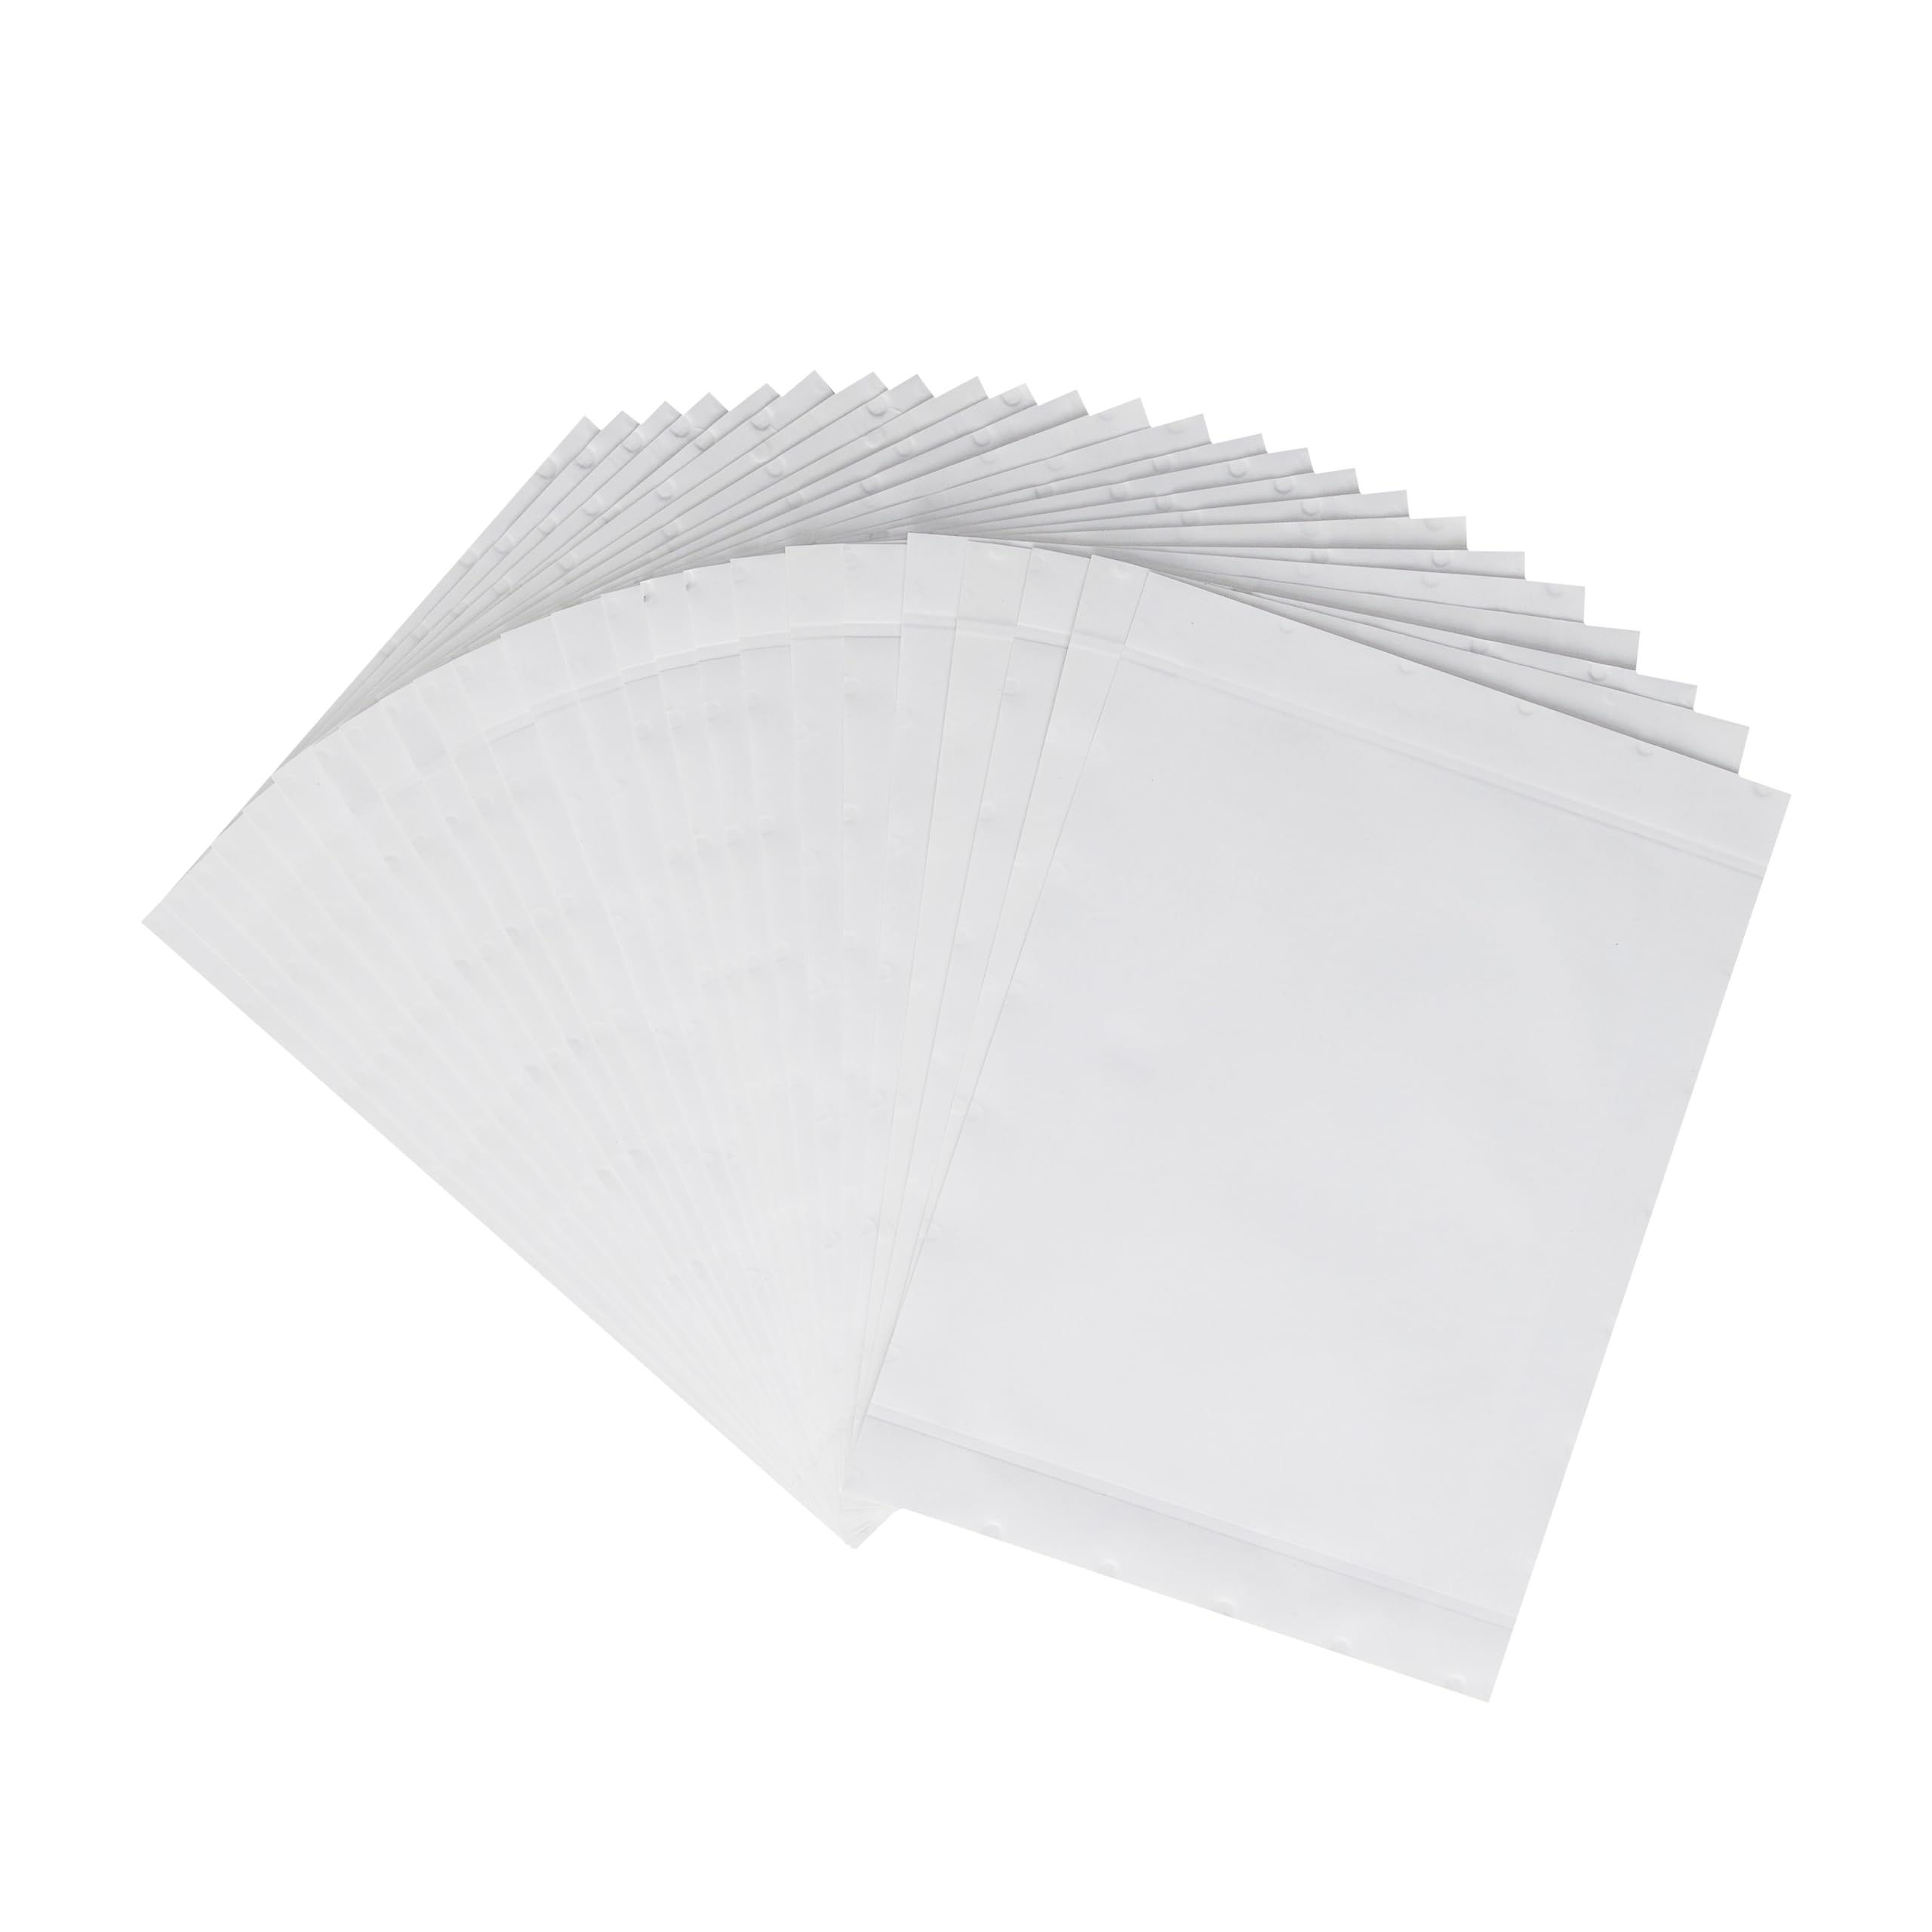 Amazon Basics Paper Shredder Sharpening and Lubricant Sheets - Pack of 24